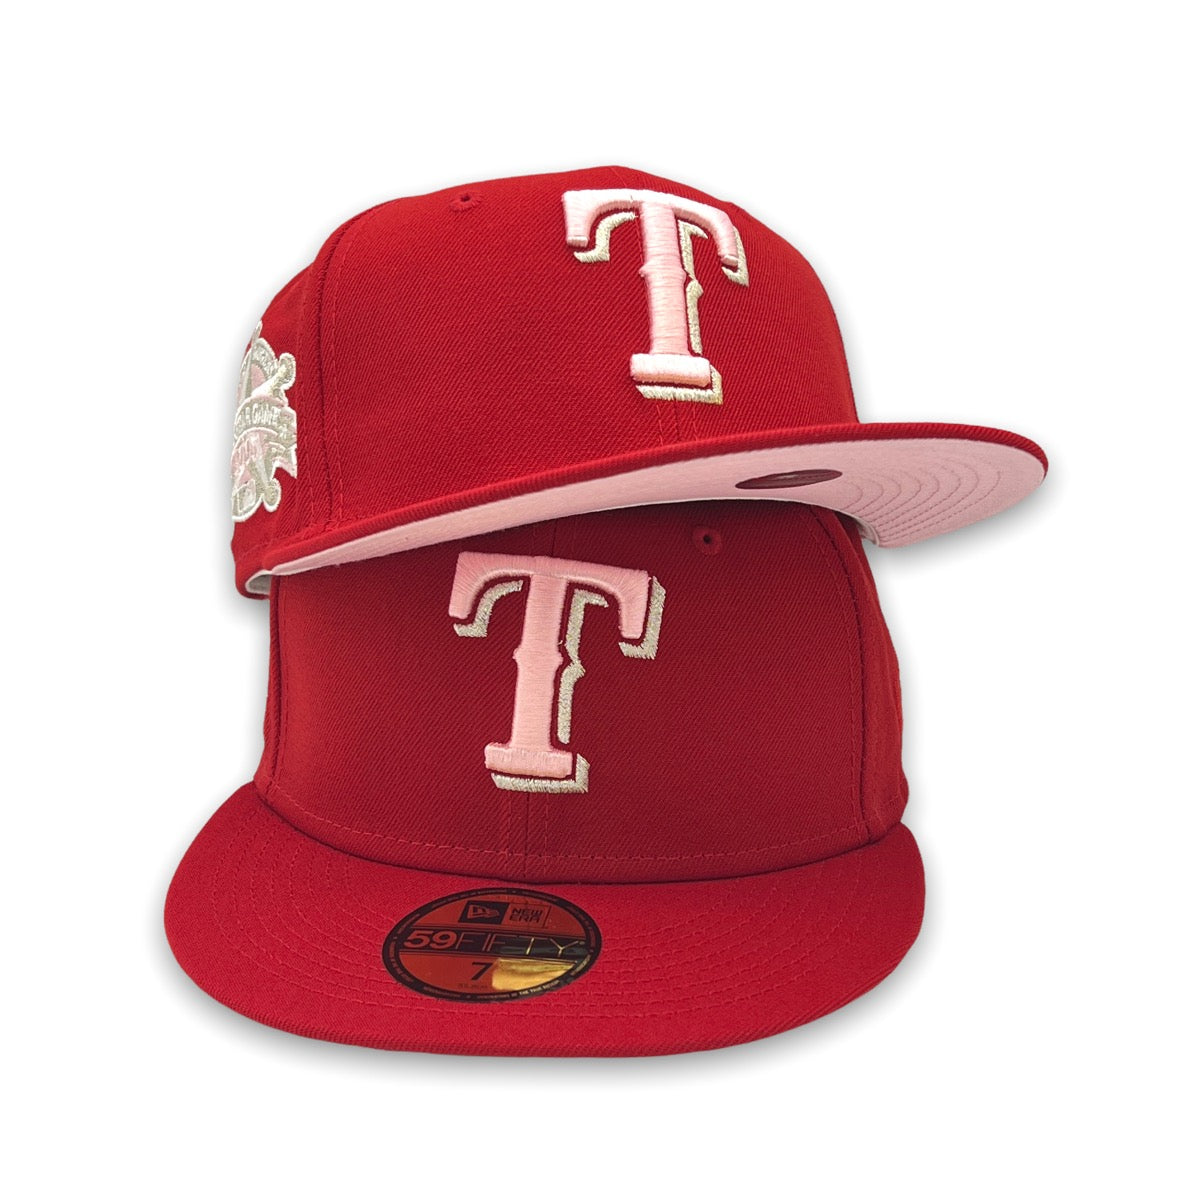 Texas Rangers Hats for Sale